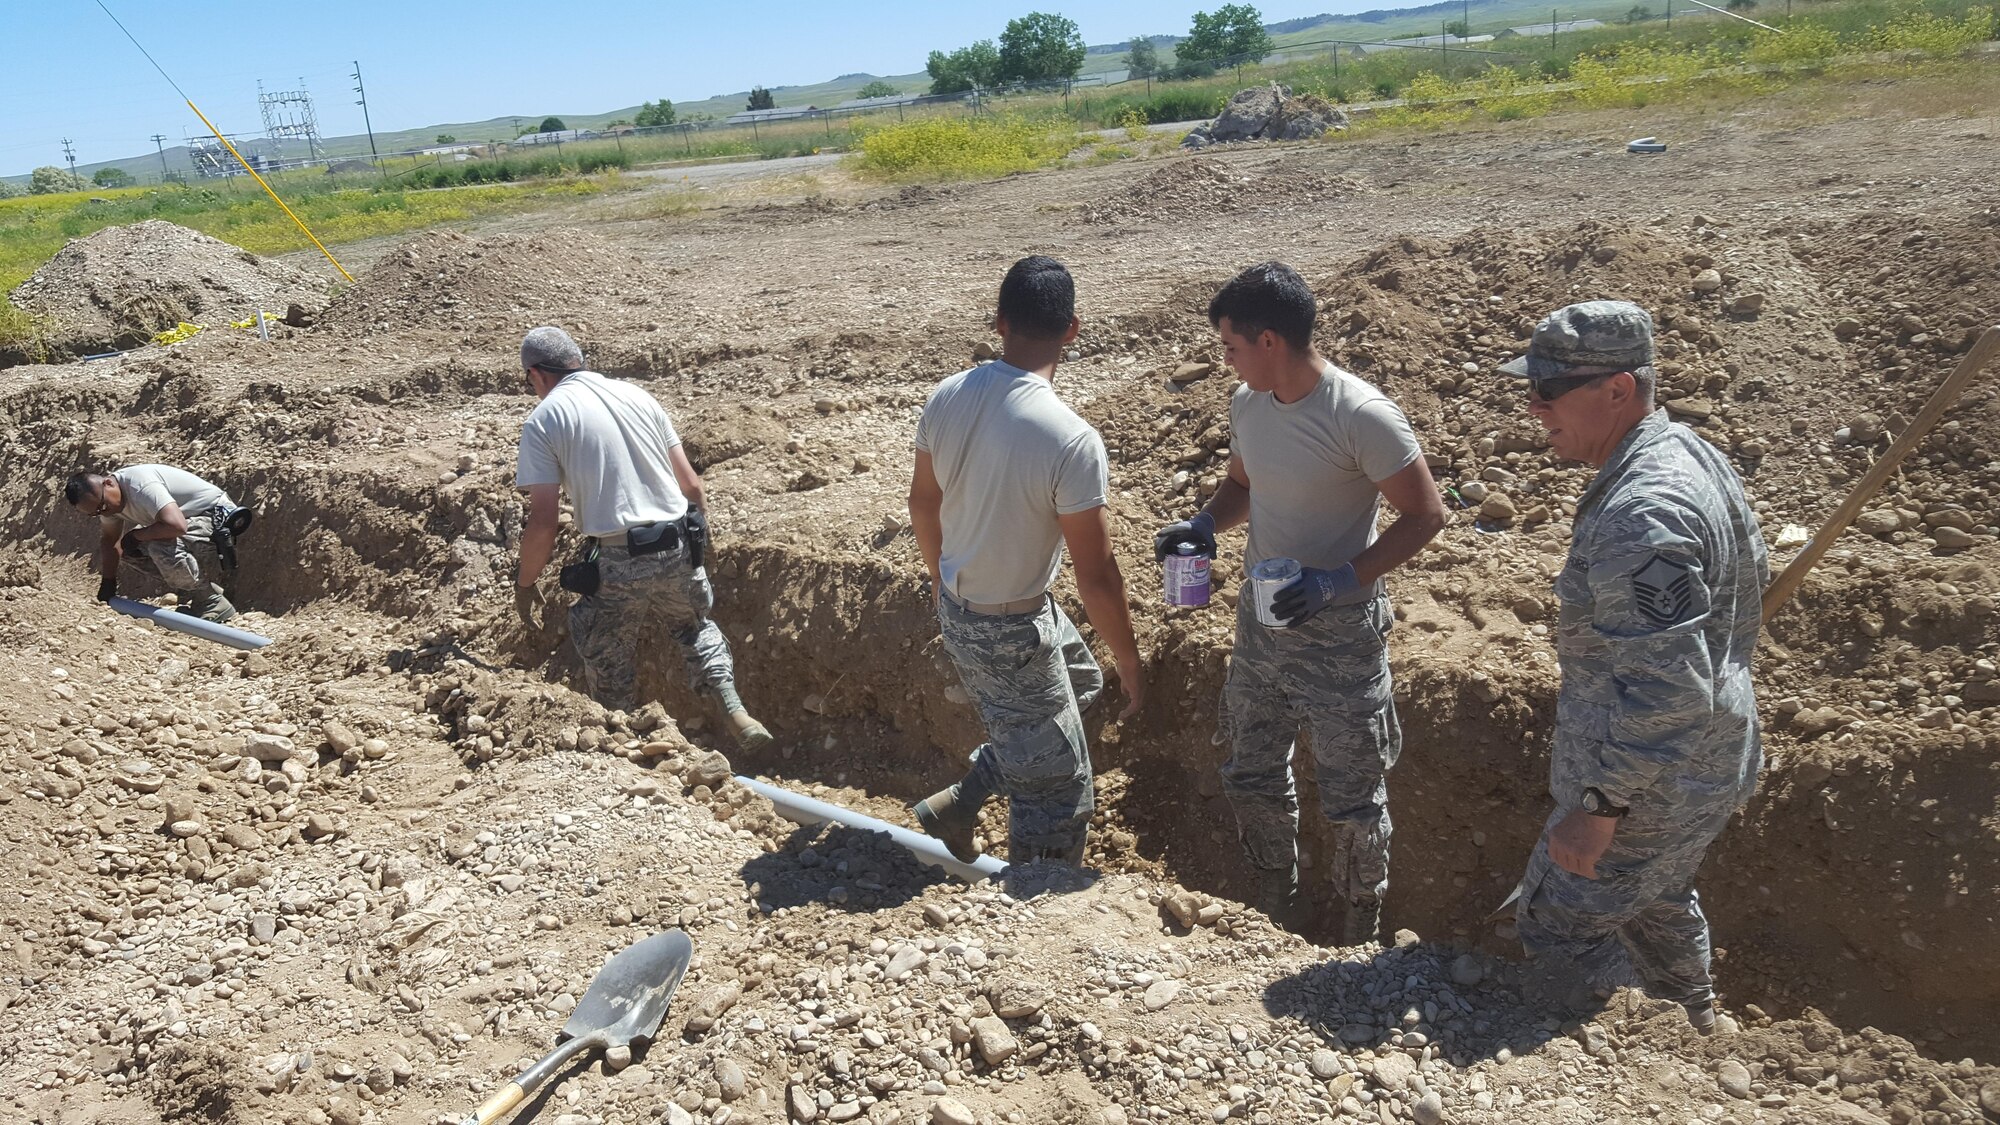 Members of the 106th Rescue Wing Civil Engineering assigned to the New York Air National Guard, dig a ditch for a pipeline at Crow Agency, Montana June 13, 2017. The effort to build and renovate homes for military service veterans of the Native American tribe Crow Nation started in May and will end in September of this year. (U.S. Air Force photo by Airman 1st Class Jonathan De Jesus)